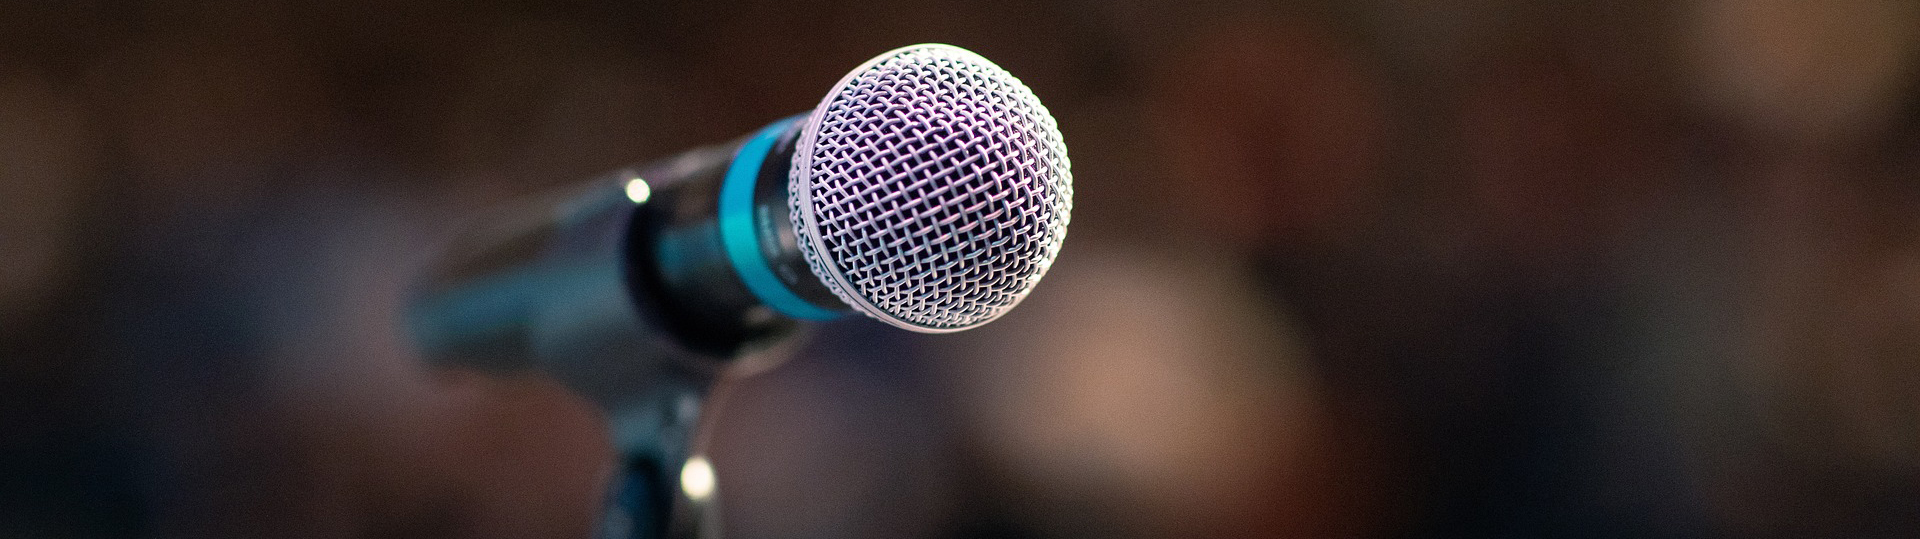 microphone ready for someone to speak